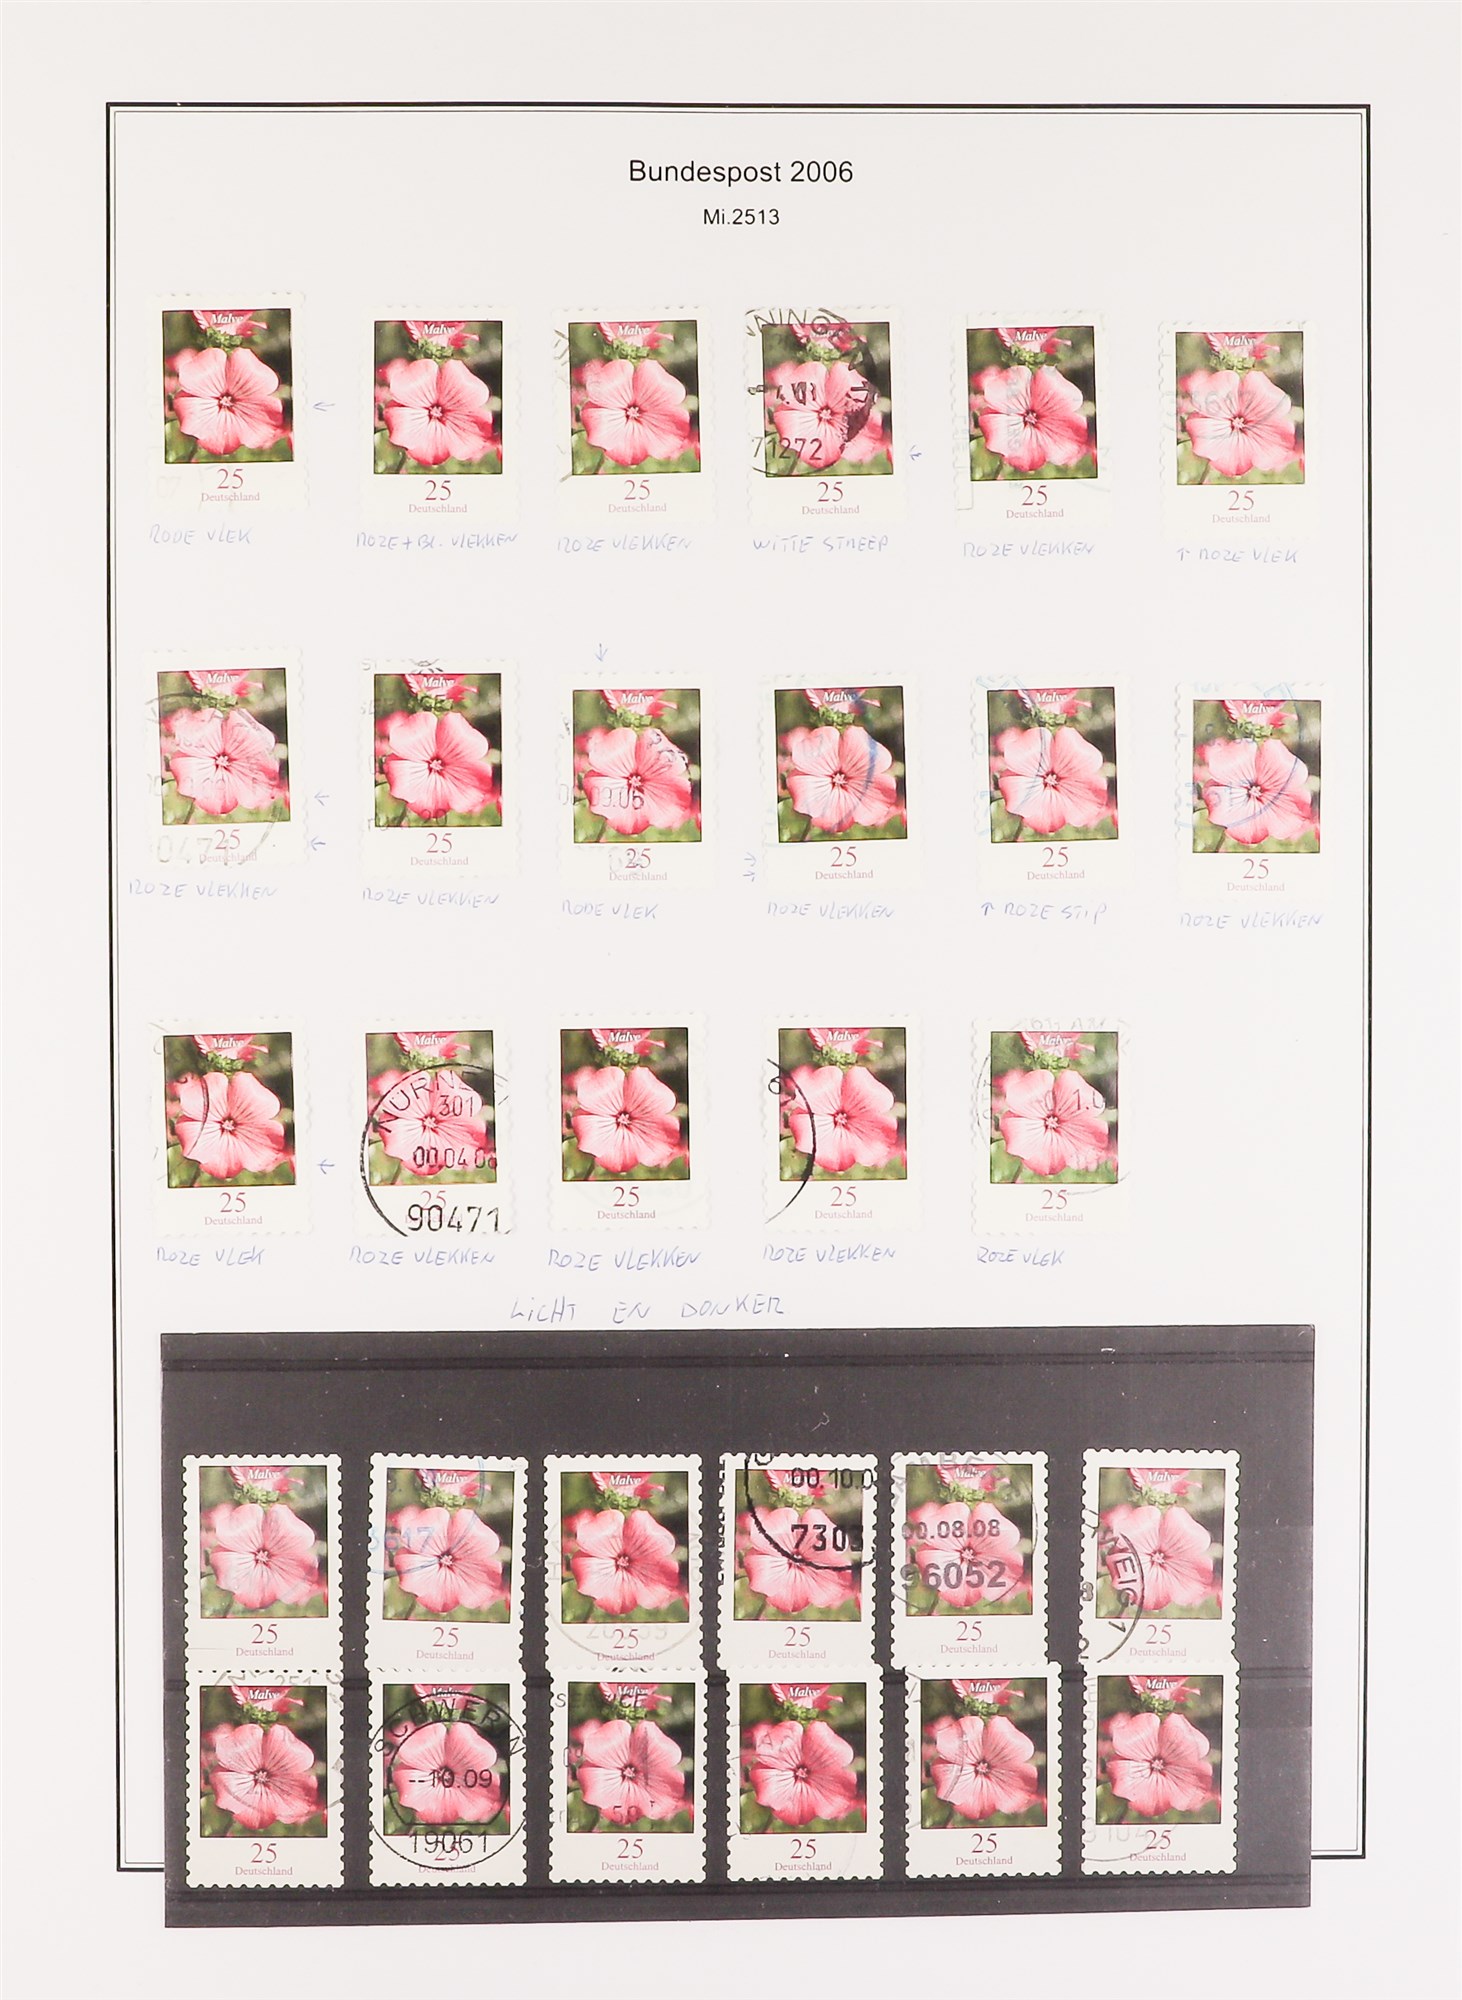 GERMANY WEST 2005 - 2009 SPECIALIZED COLLECTION of 1000+ mint, never hinged mint & used stamps, - Image 7 of 19